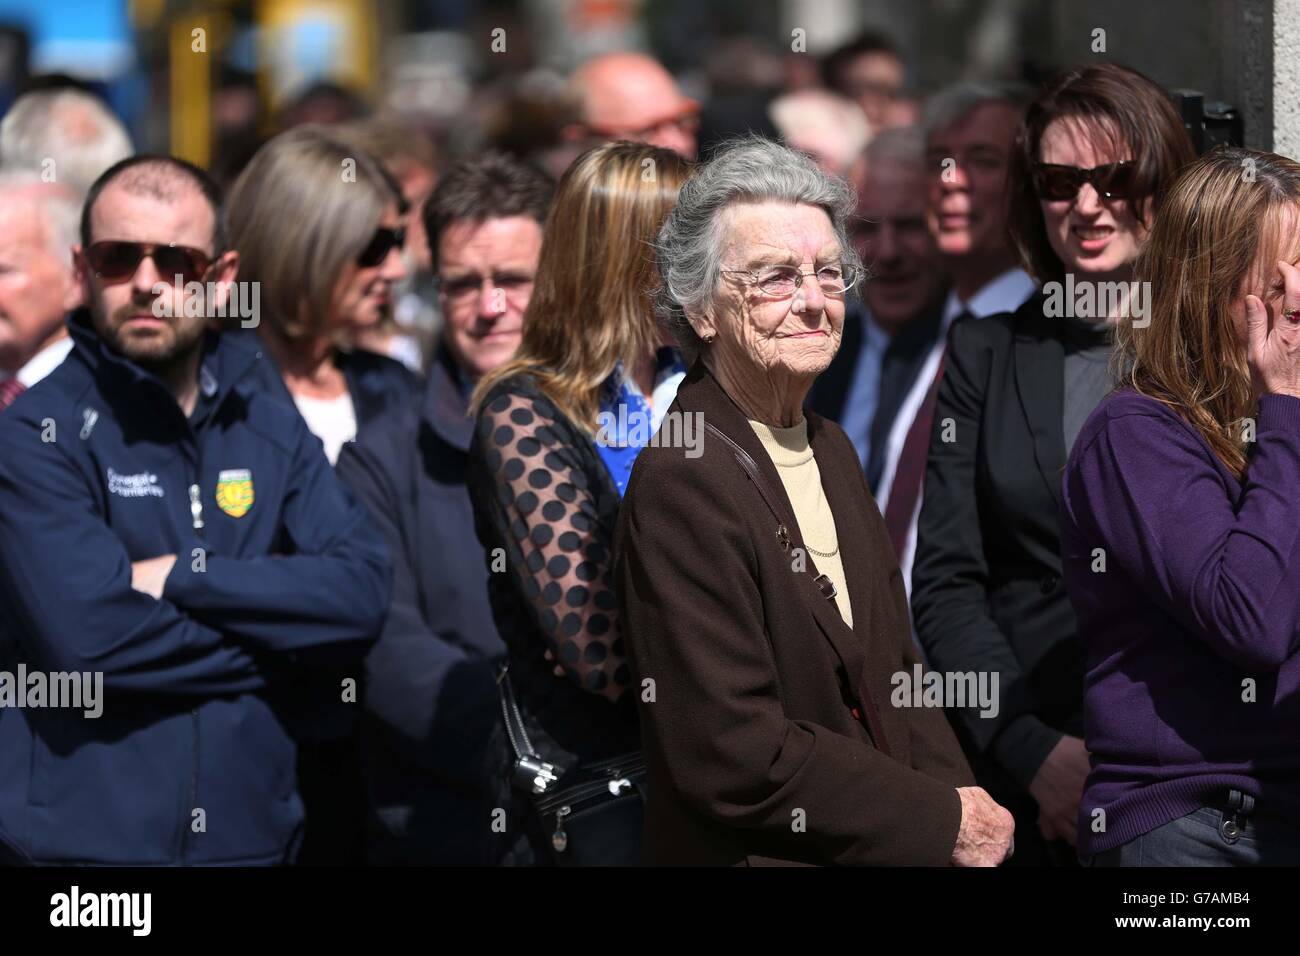 Members of the public gathering to pay their respects to former Taoiseach Albert Reynolds as he lies in state at the Mansion House, Dublin, before his funeral on Monday. Stock Photo